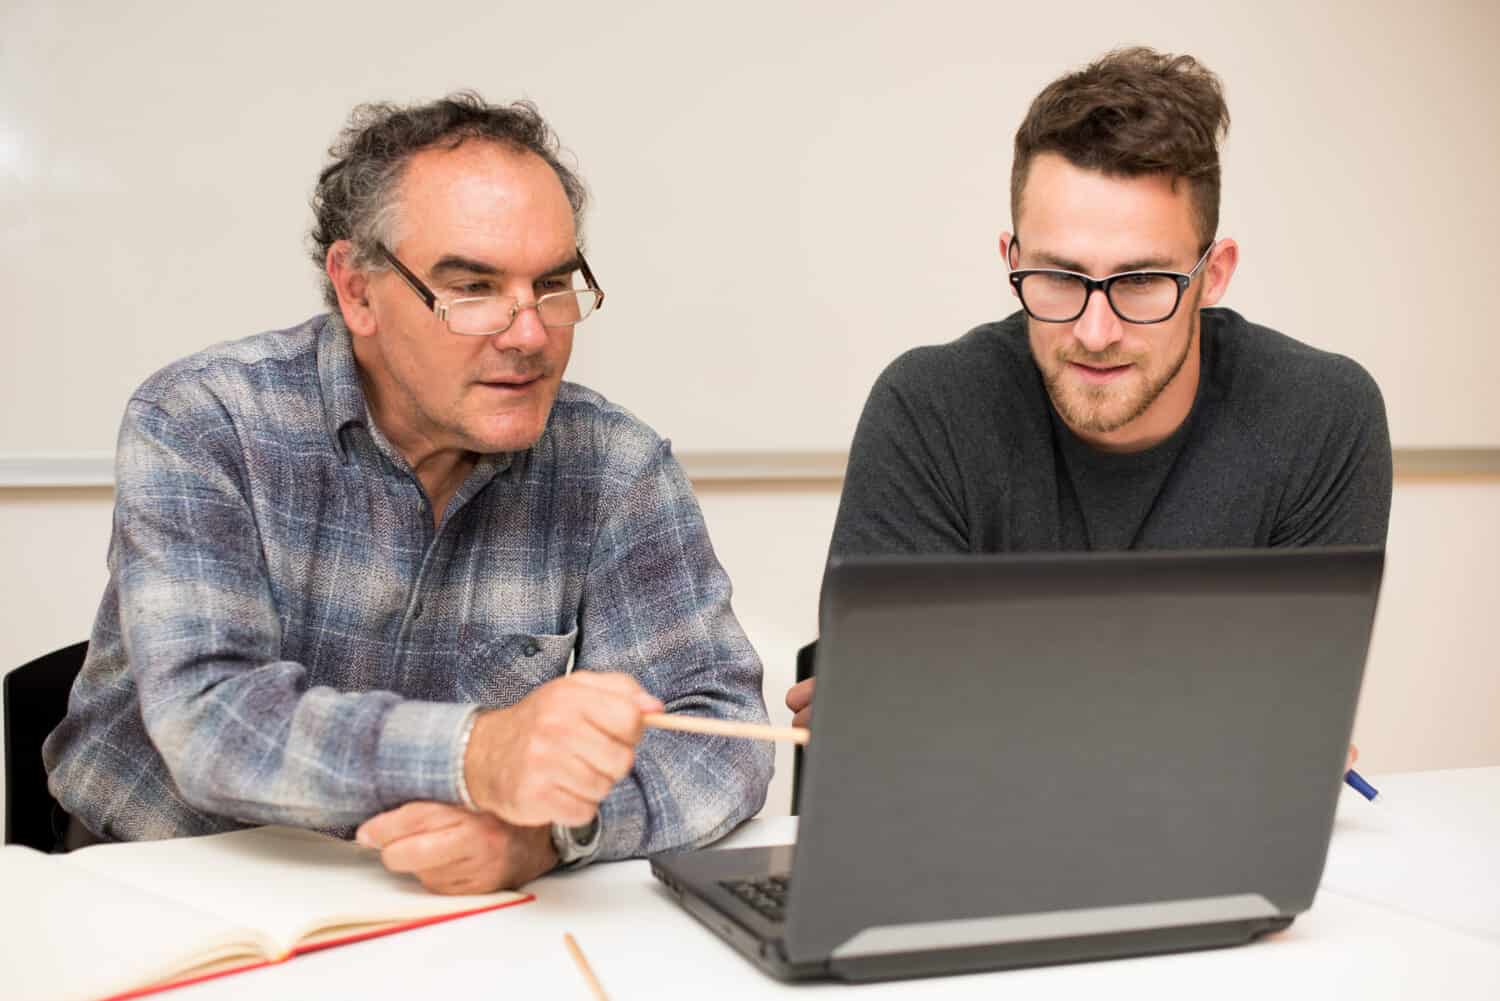 Young man teaching elderly man of usage of computer. Inter generational transfer of computer skills.